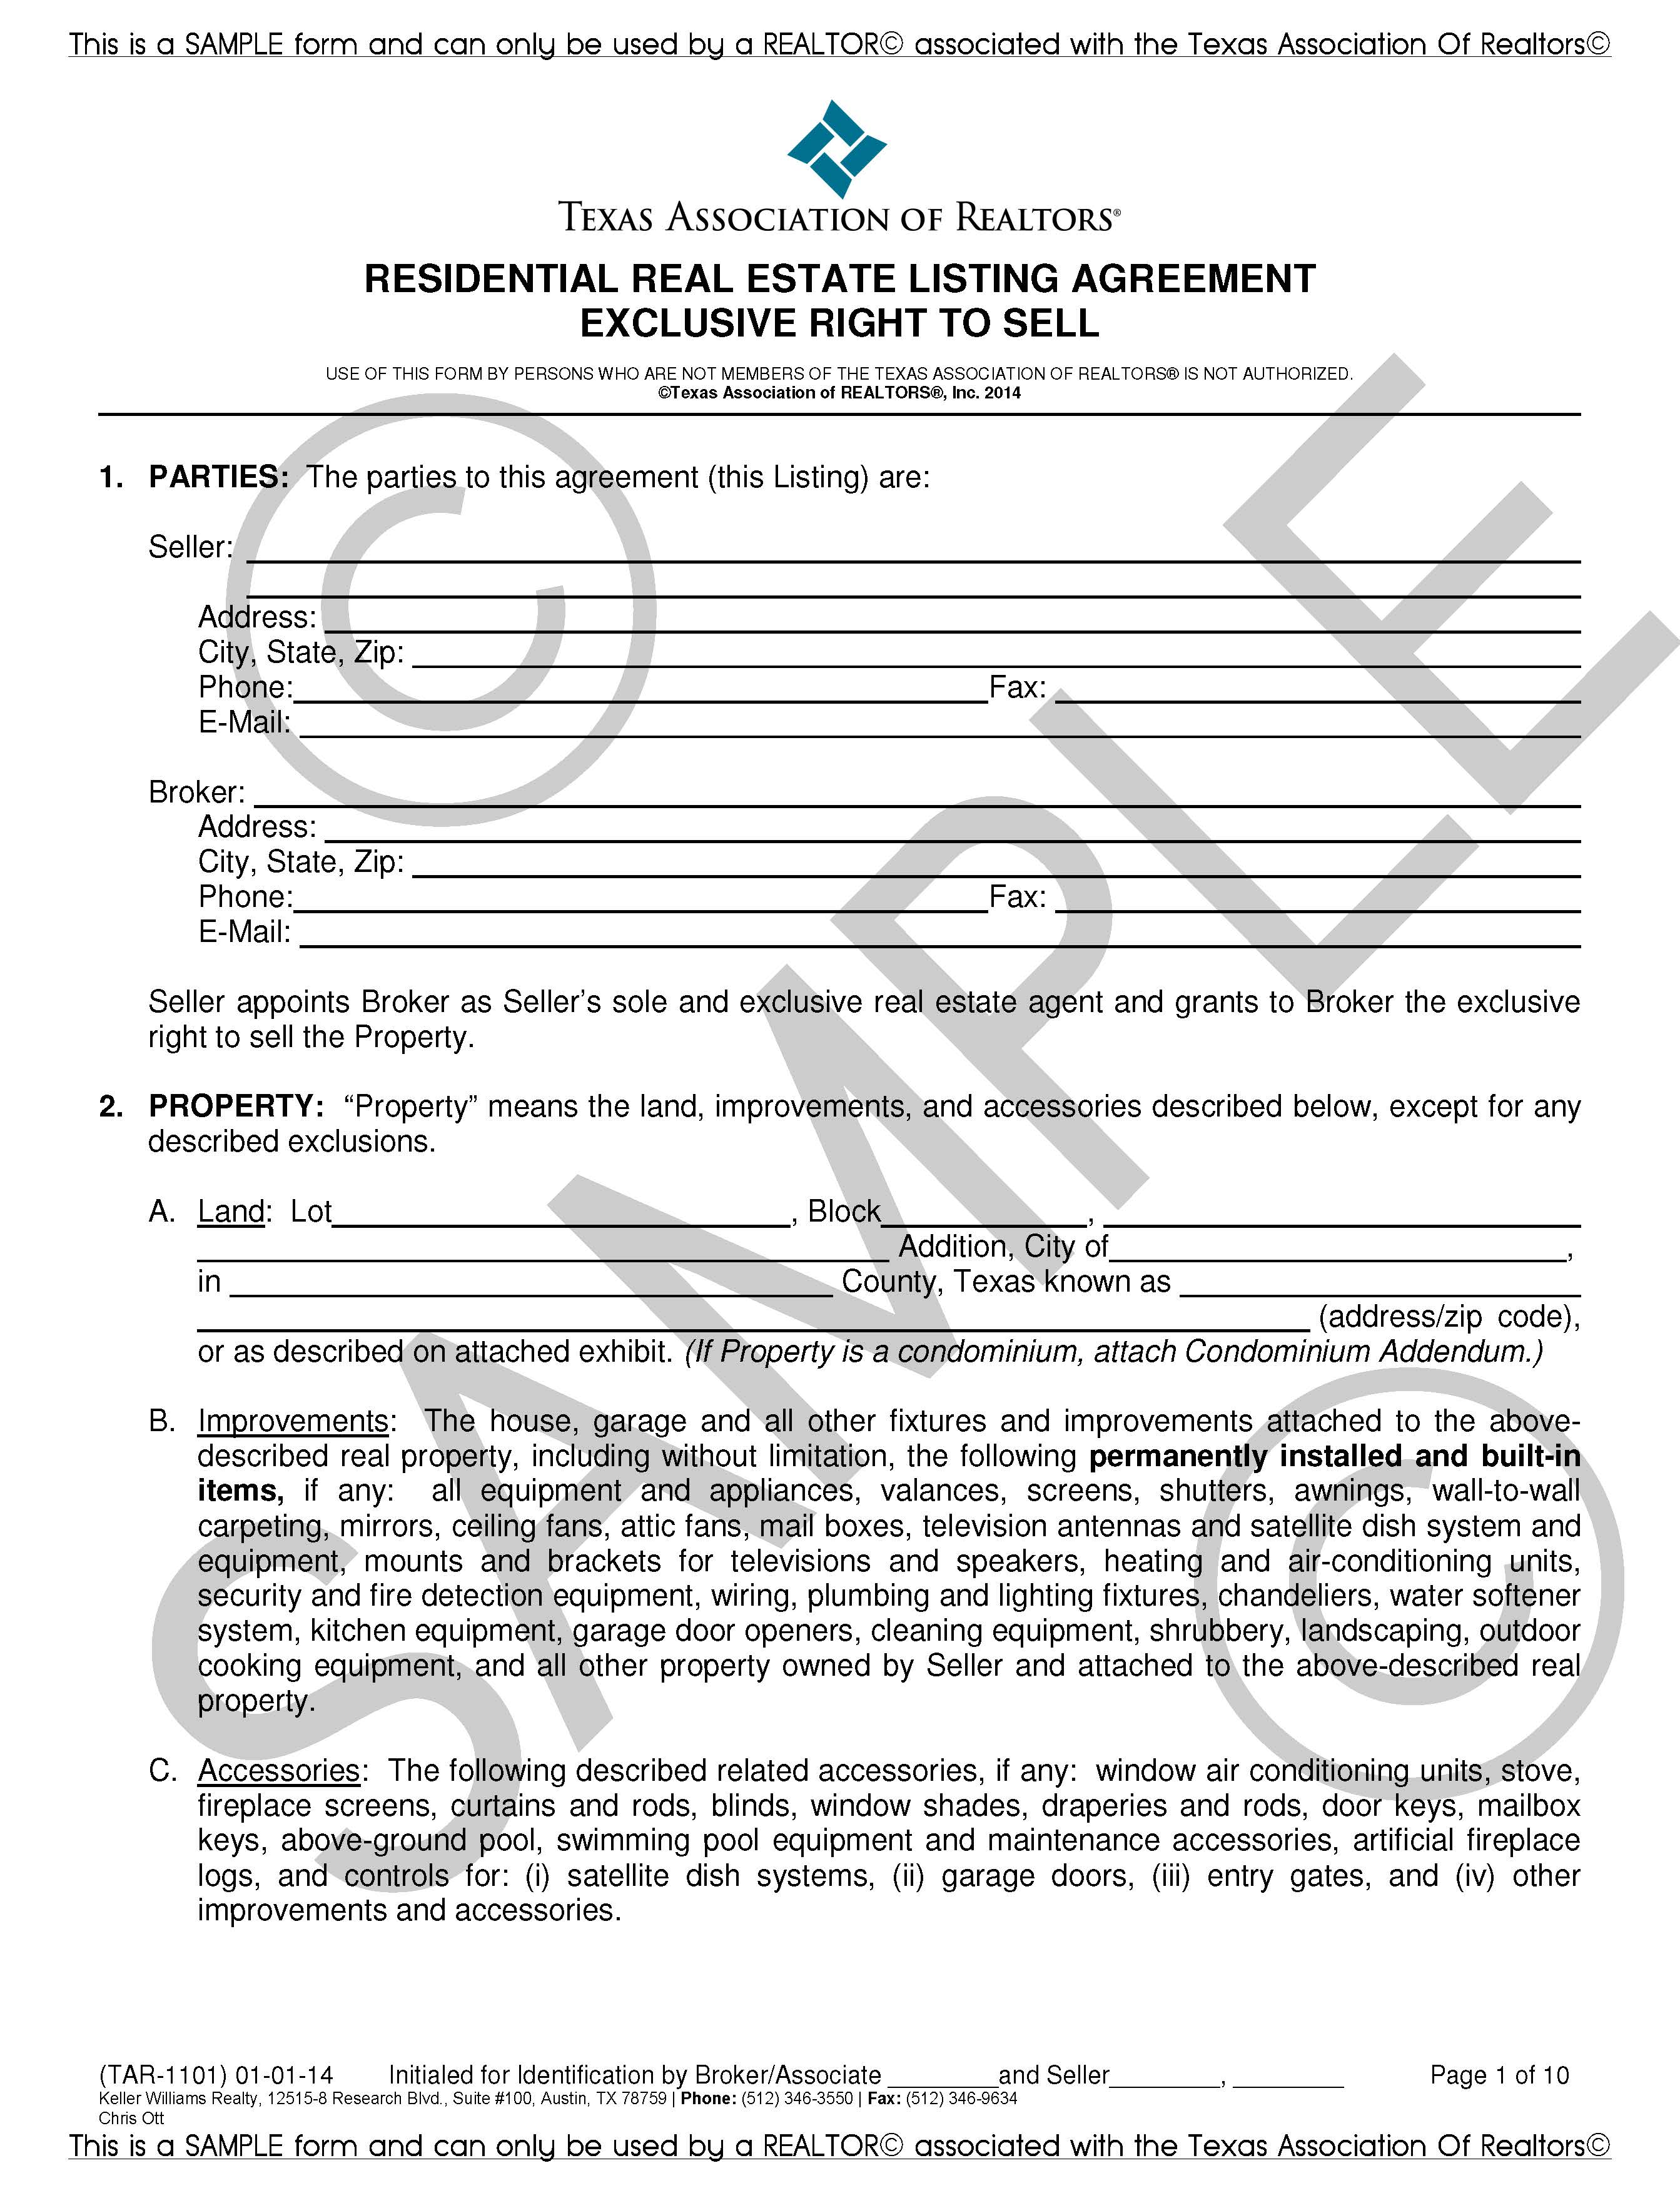 Seller's Listing Agreement – Exclusive Right to Sell, Exchange or 